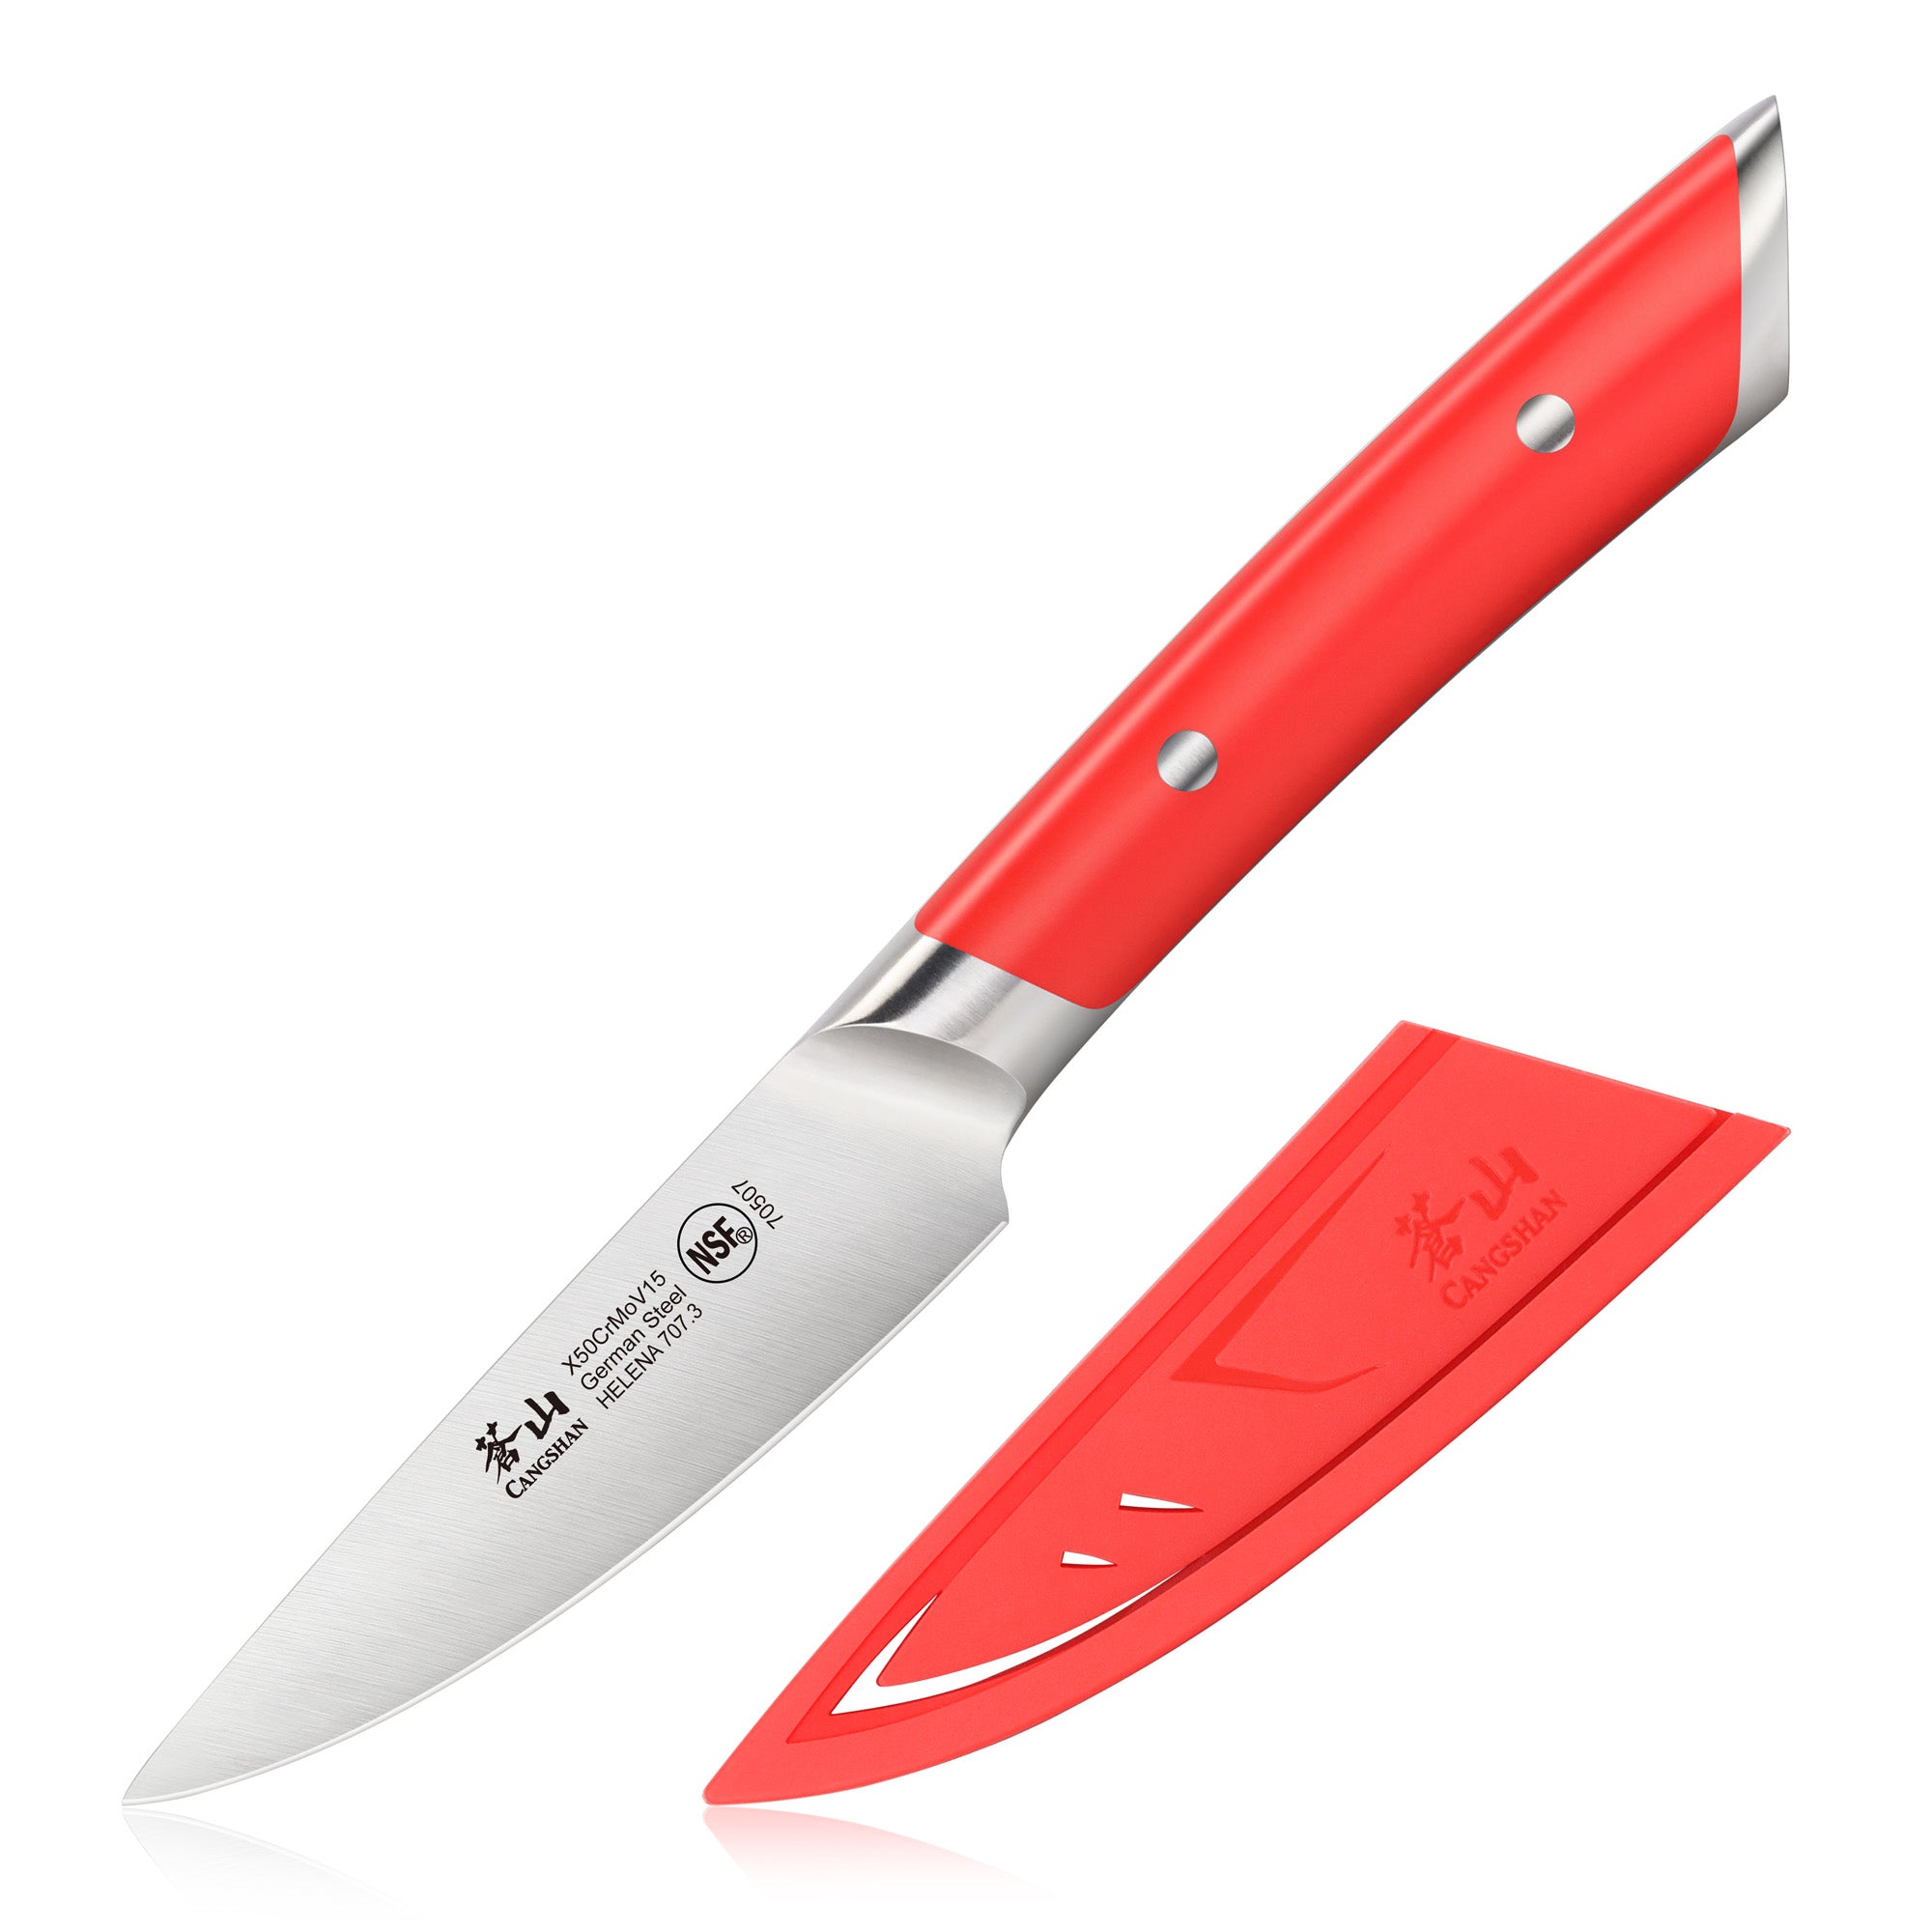 Cangshan Helena 3.5" Paring Knife, Multiple Colors